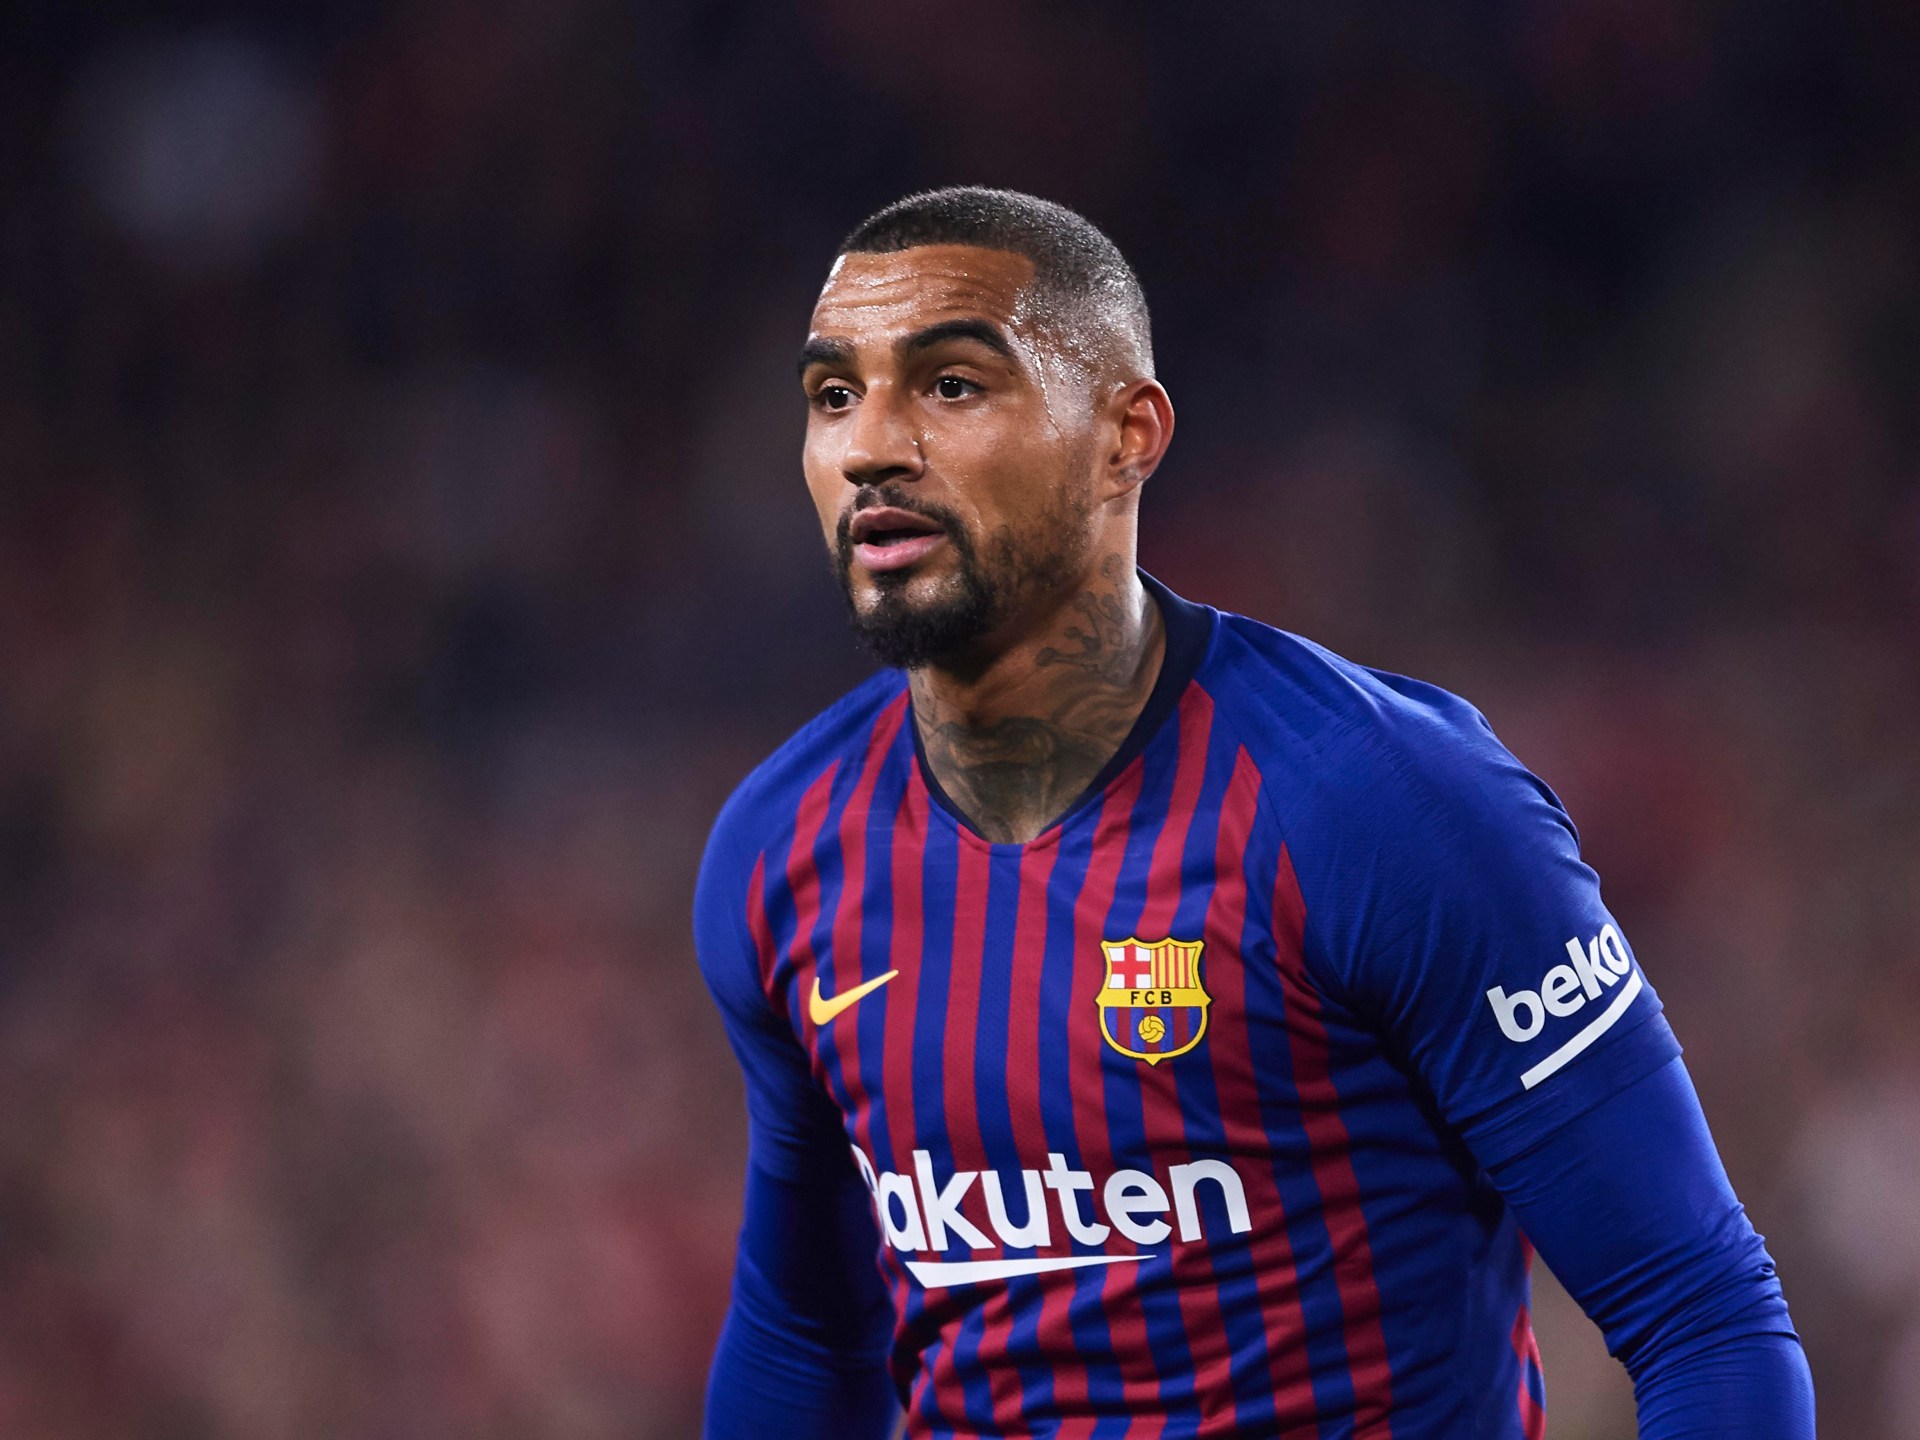 Kevin-Prince Boateng Reveals He Was Forced To Show Love For Barcelona